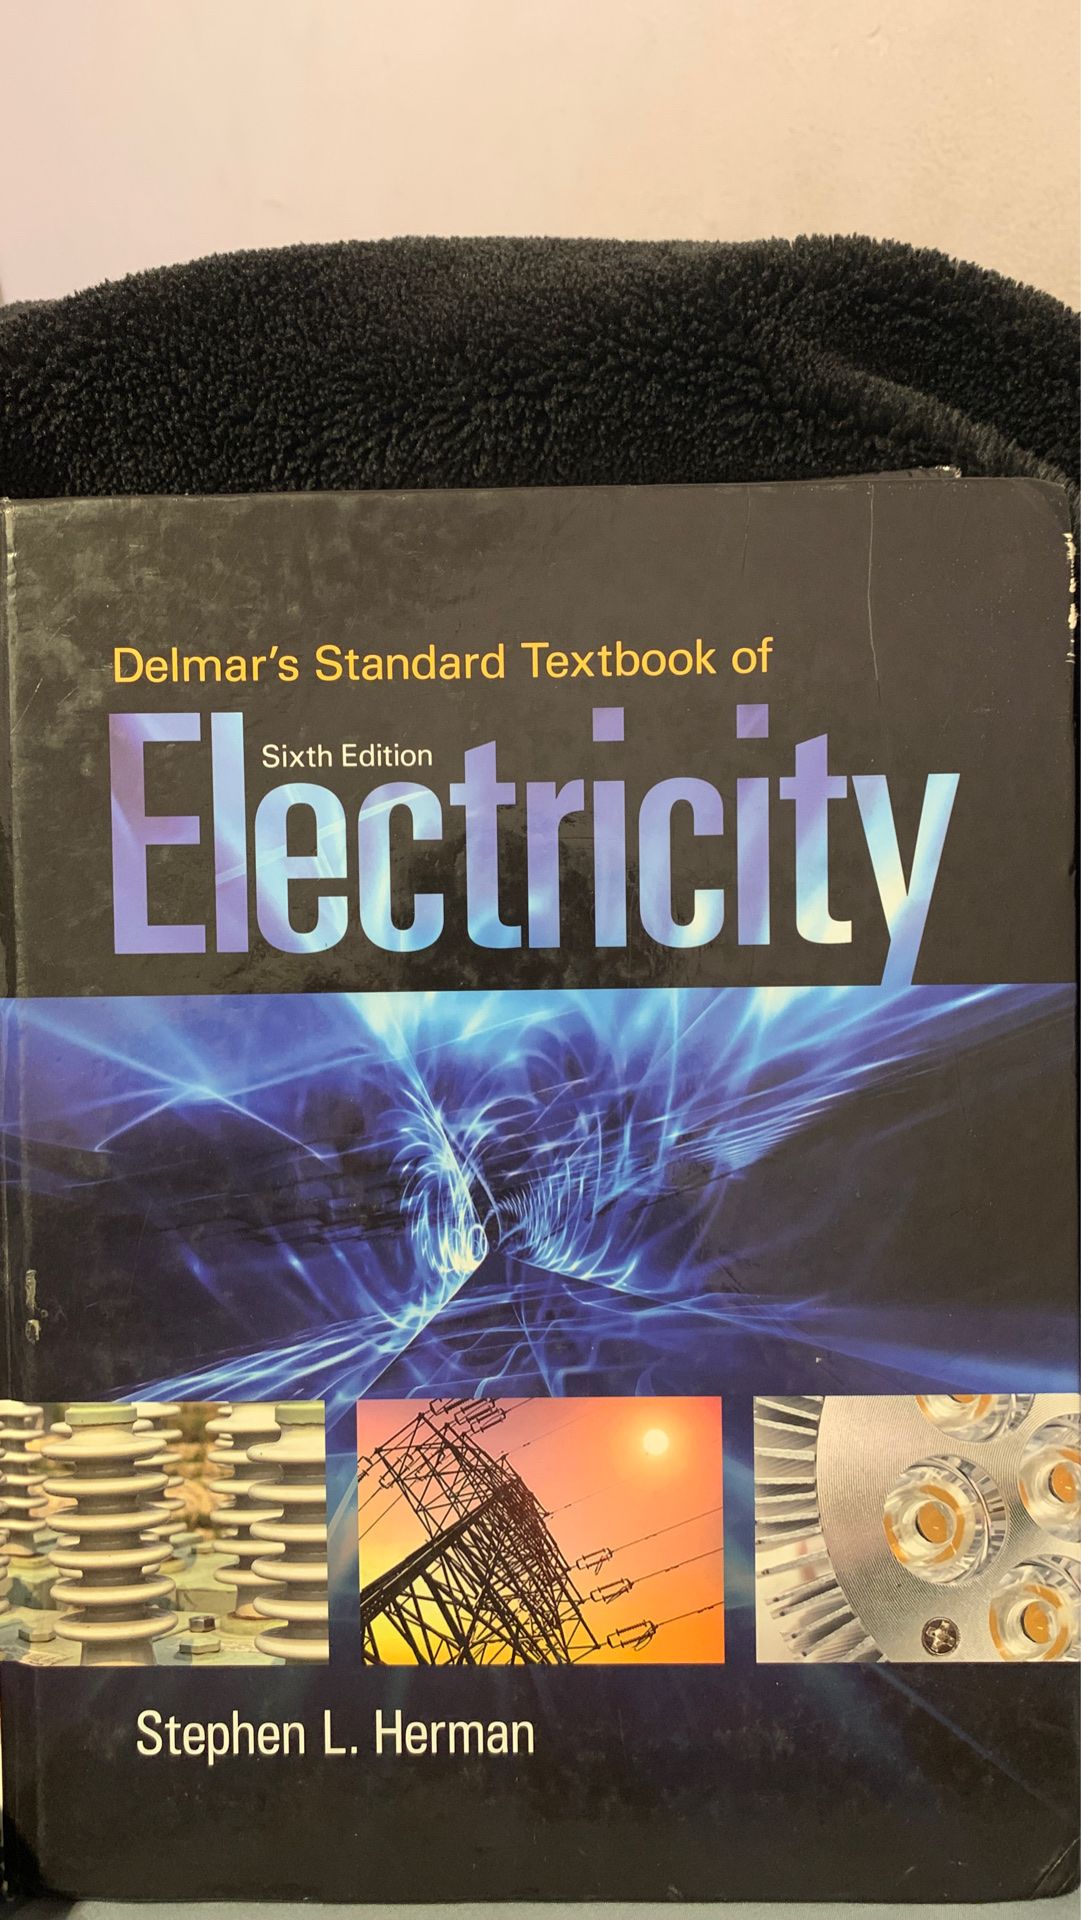 Delmar’s standard textbook of electricity